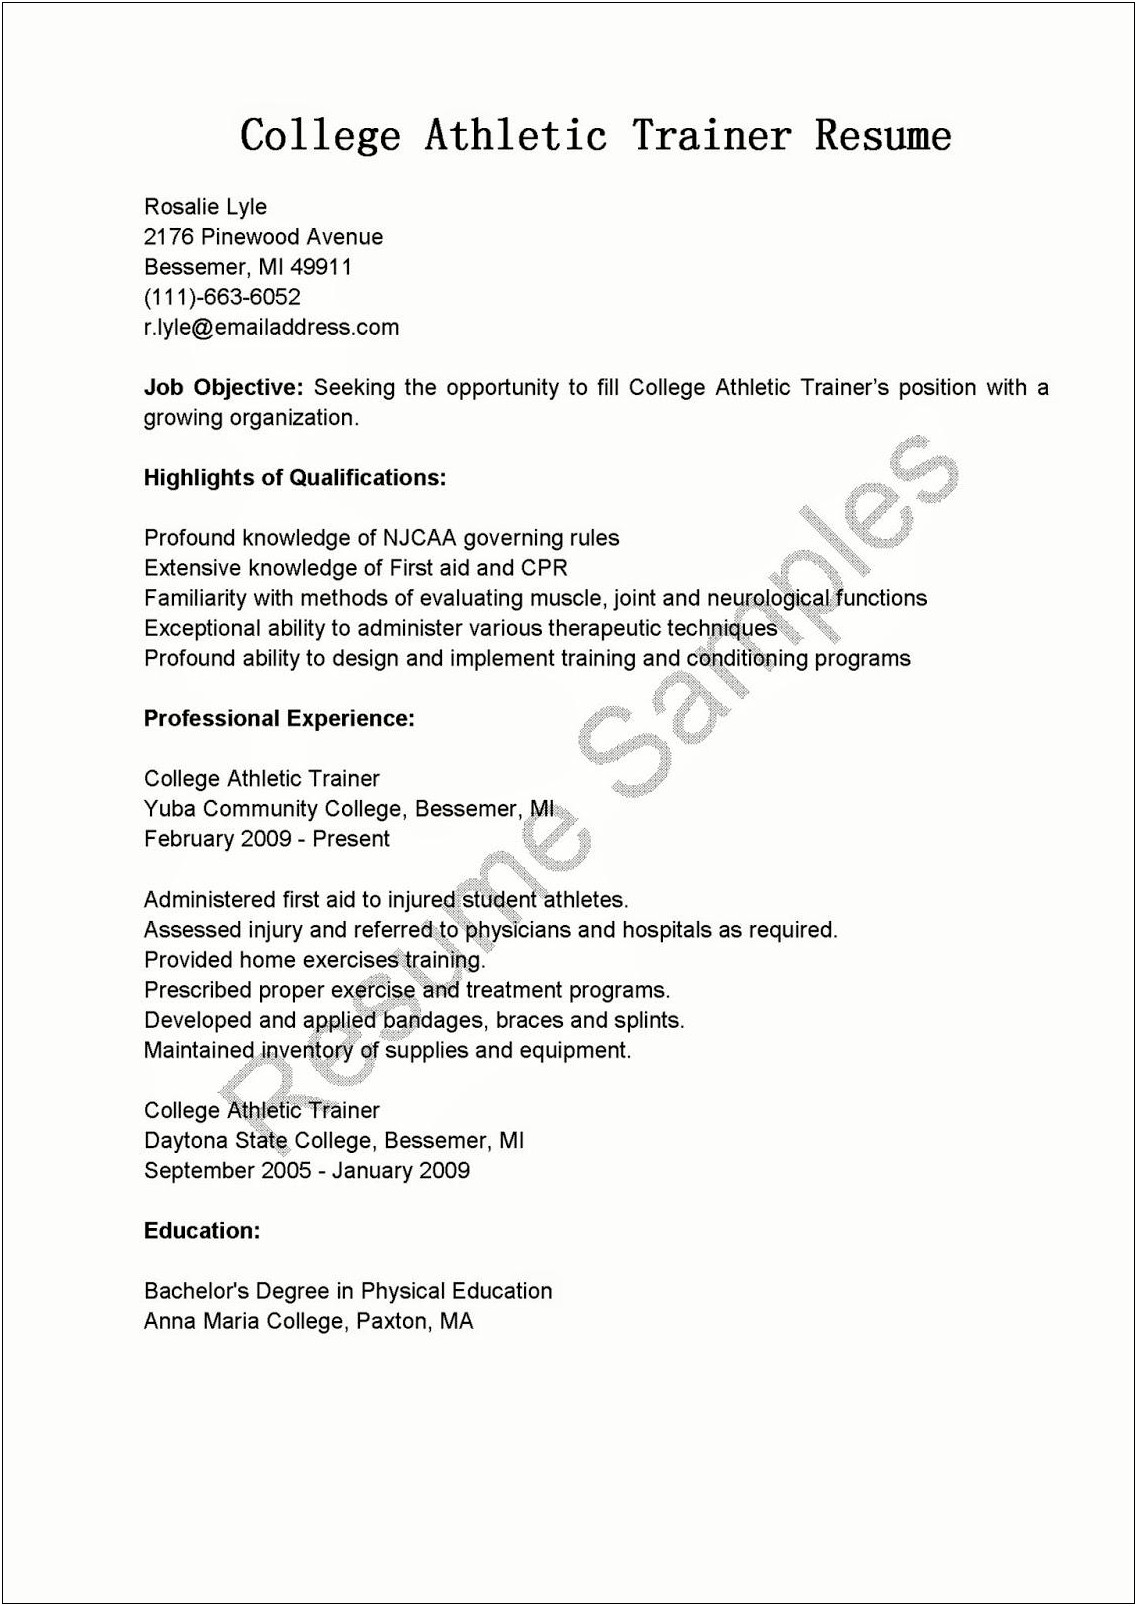 Resume Objectives For Athletic Trainers